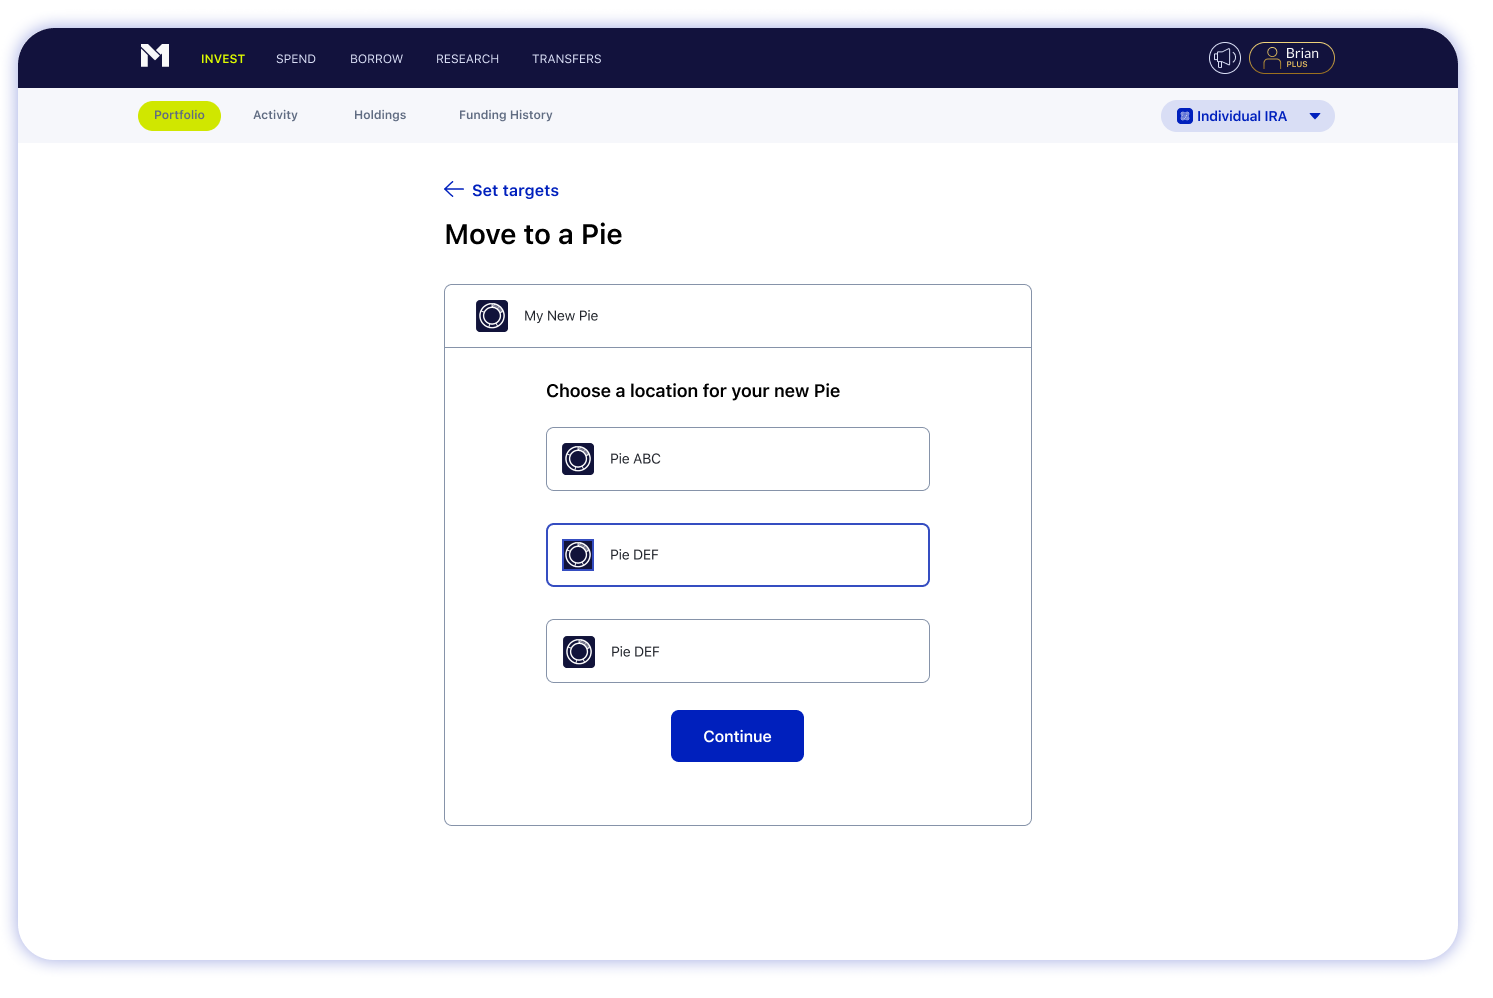 M1 Finance web account screen received securities move to a Pie